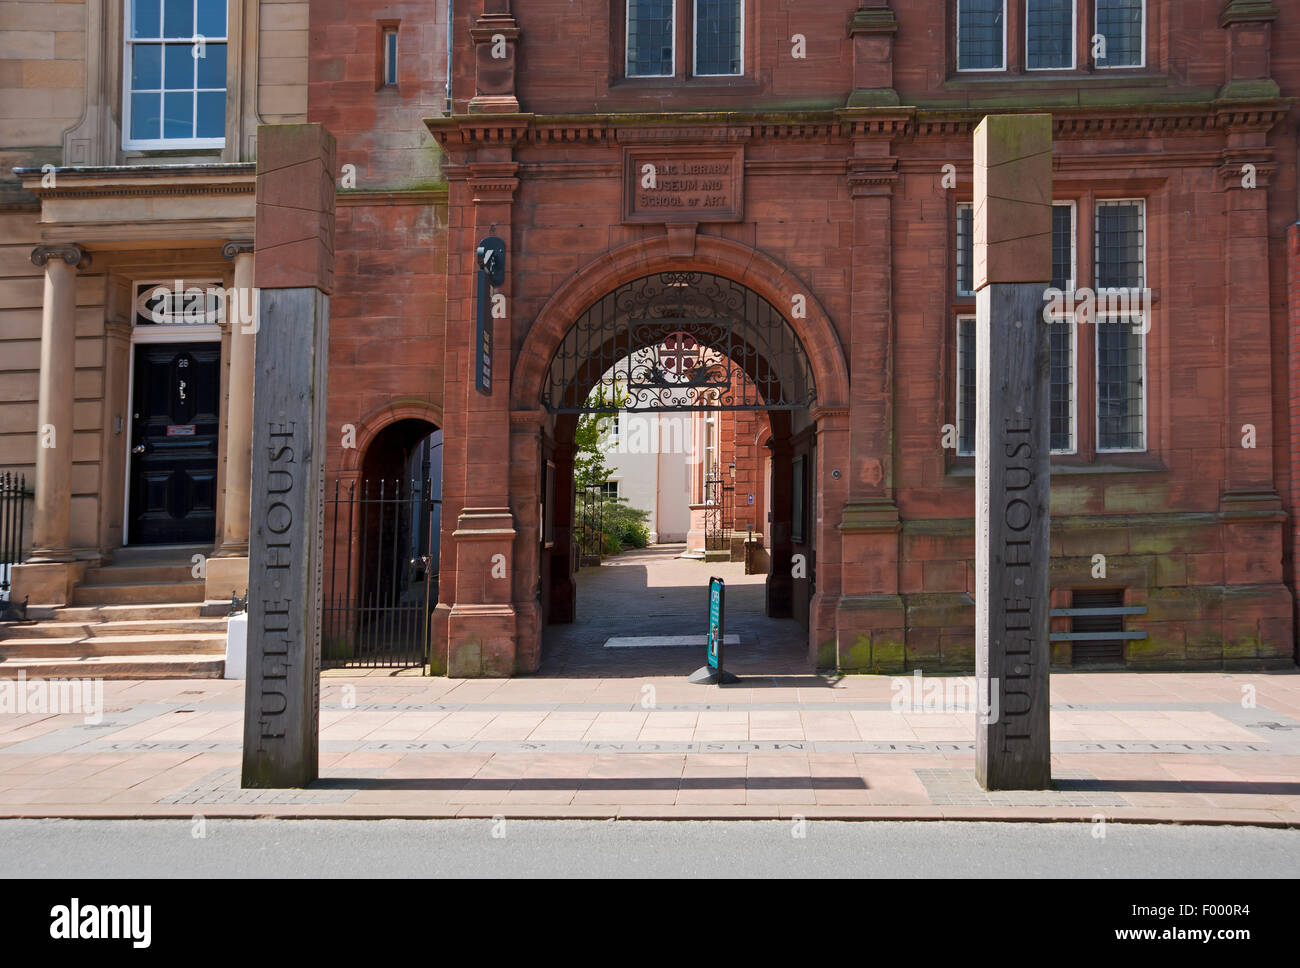 Entrance to the Tullie House Museum and Art Gallery in summer Carlisle Cumbria England UK United Kingdom GB Great Britain Stock Photo